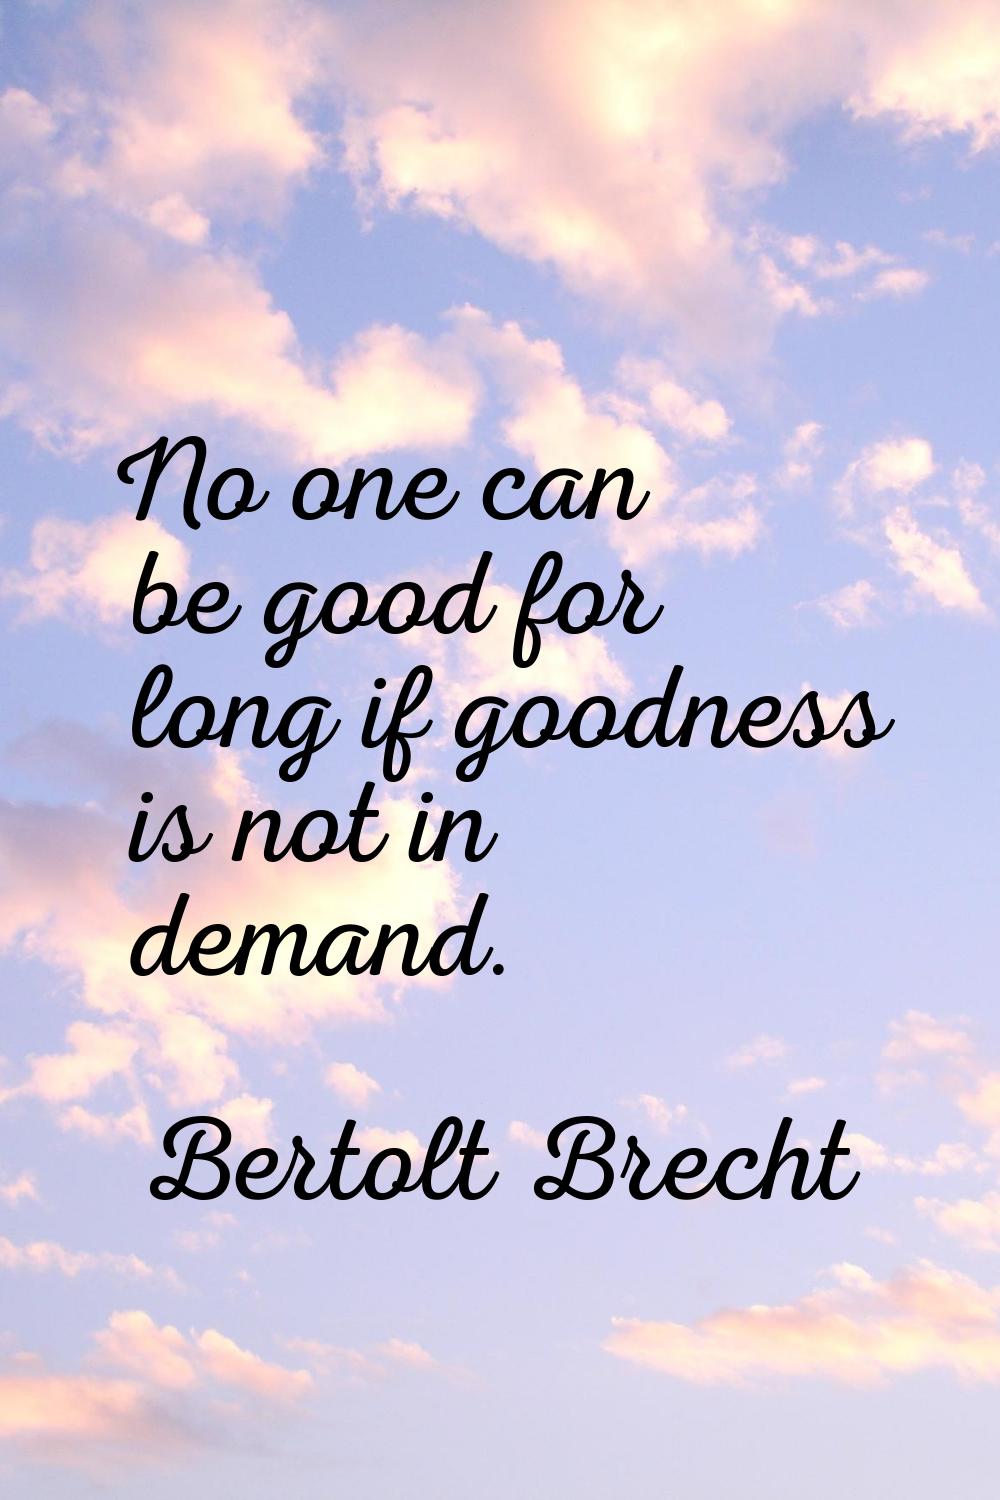 No one can be good for long if goodness is not in demand.